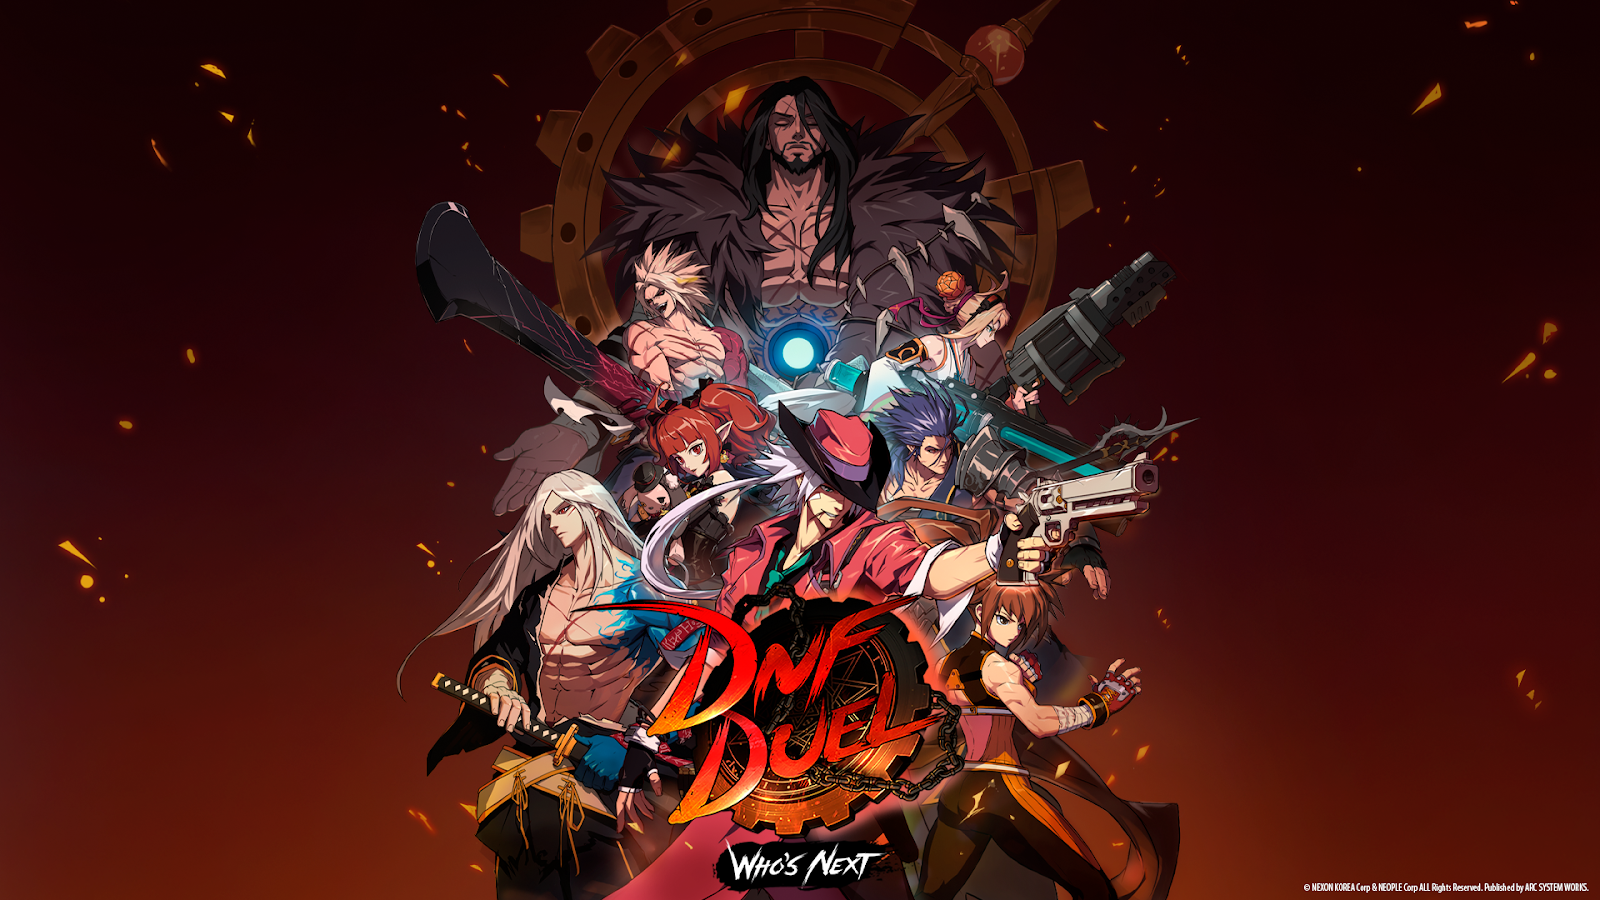 DNF Duel Available now!